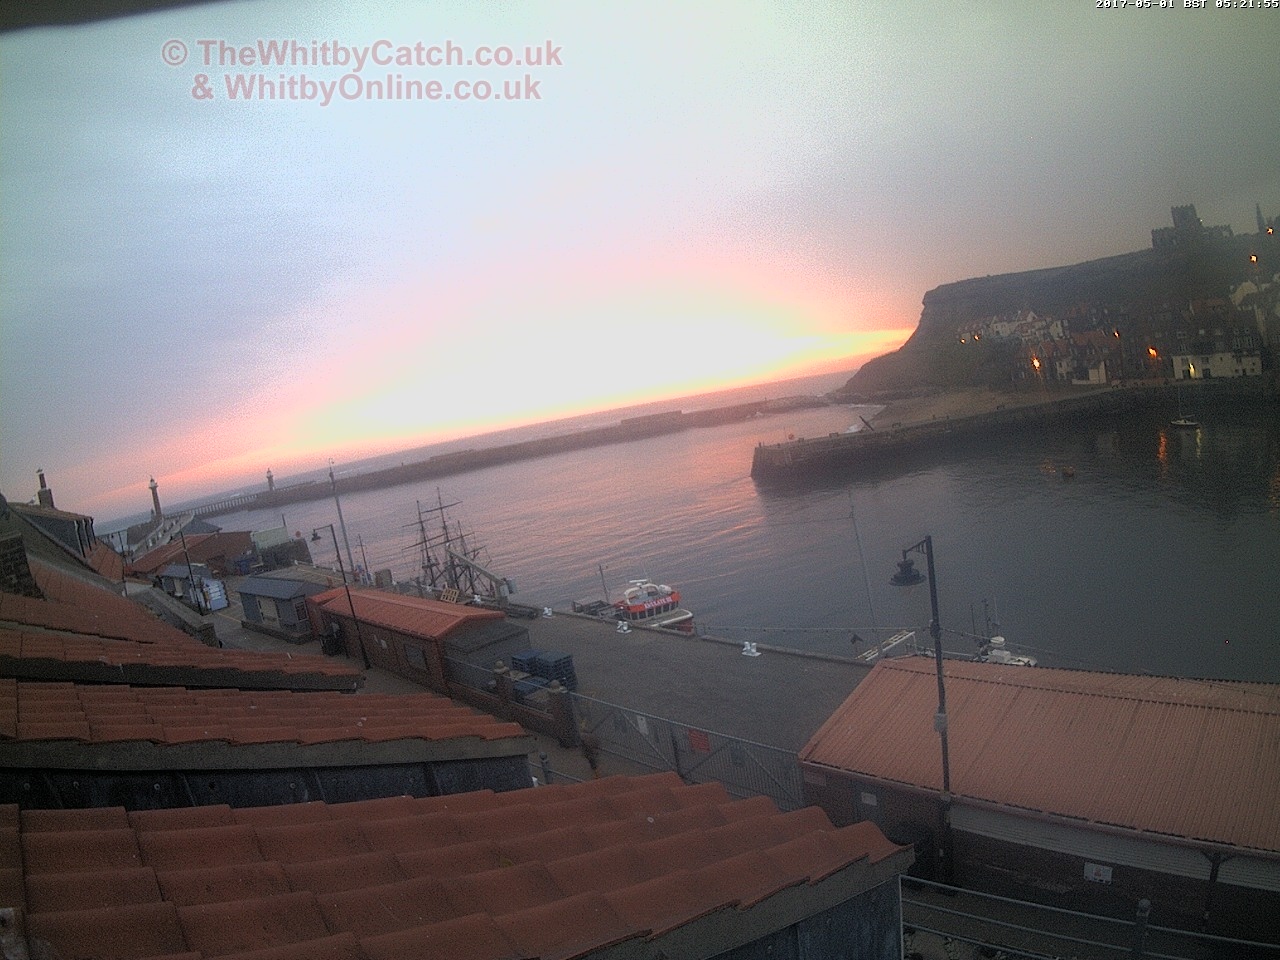 Whitby Mon 1st May 2017 05:22.